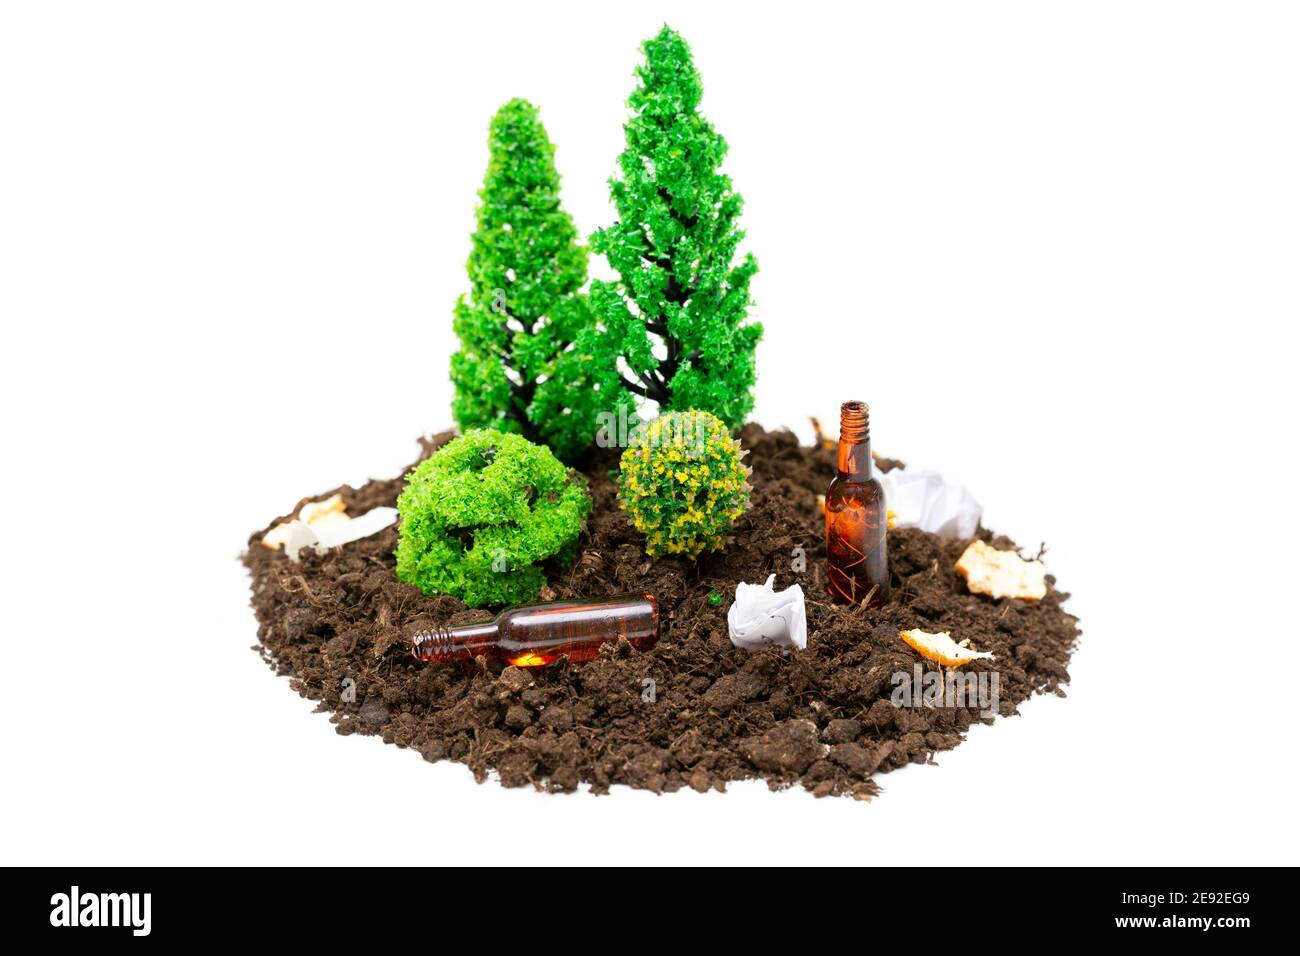 Miniature toy forest setup with a lot of rubbish, tiny glass bottles and paper lying around.The concept of keeping forests and parks clean. Stock Photo